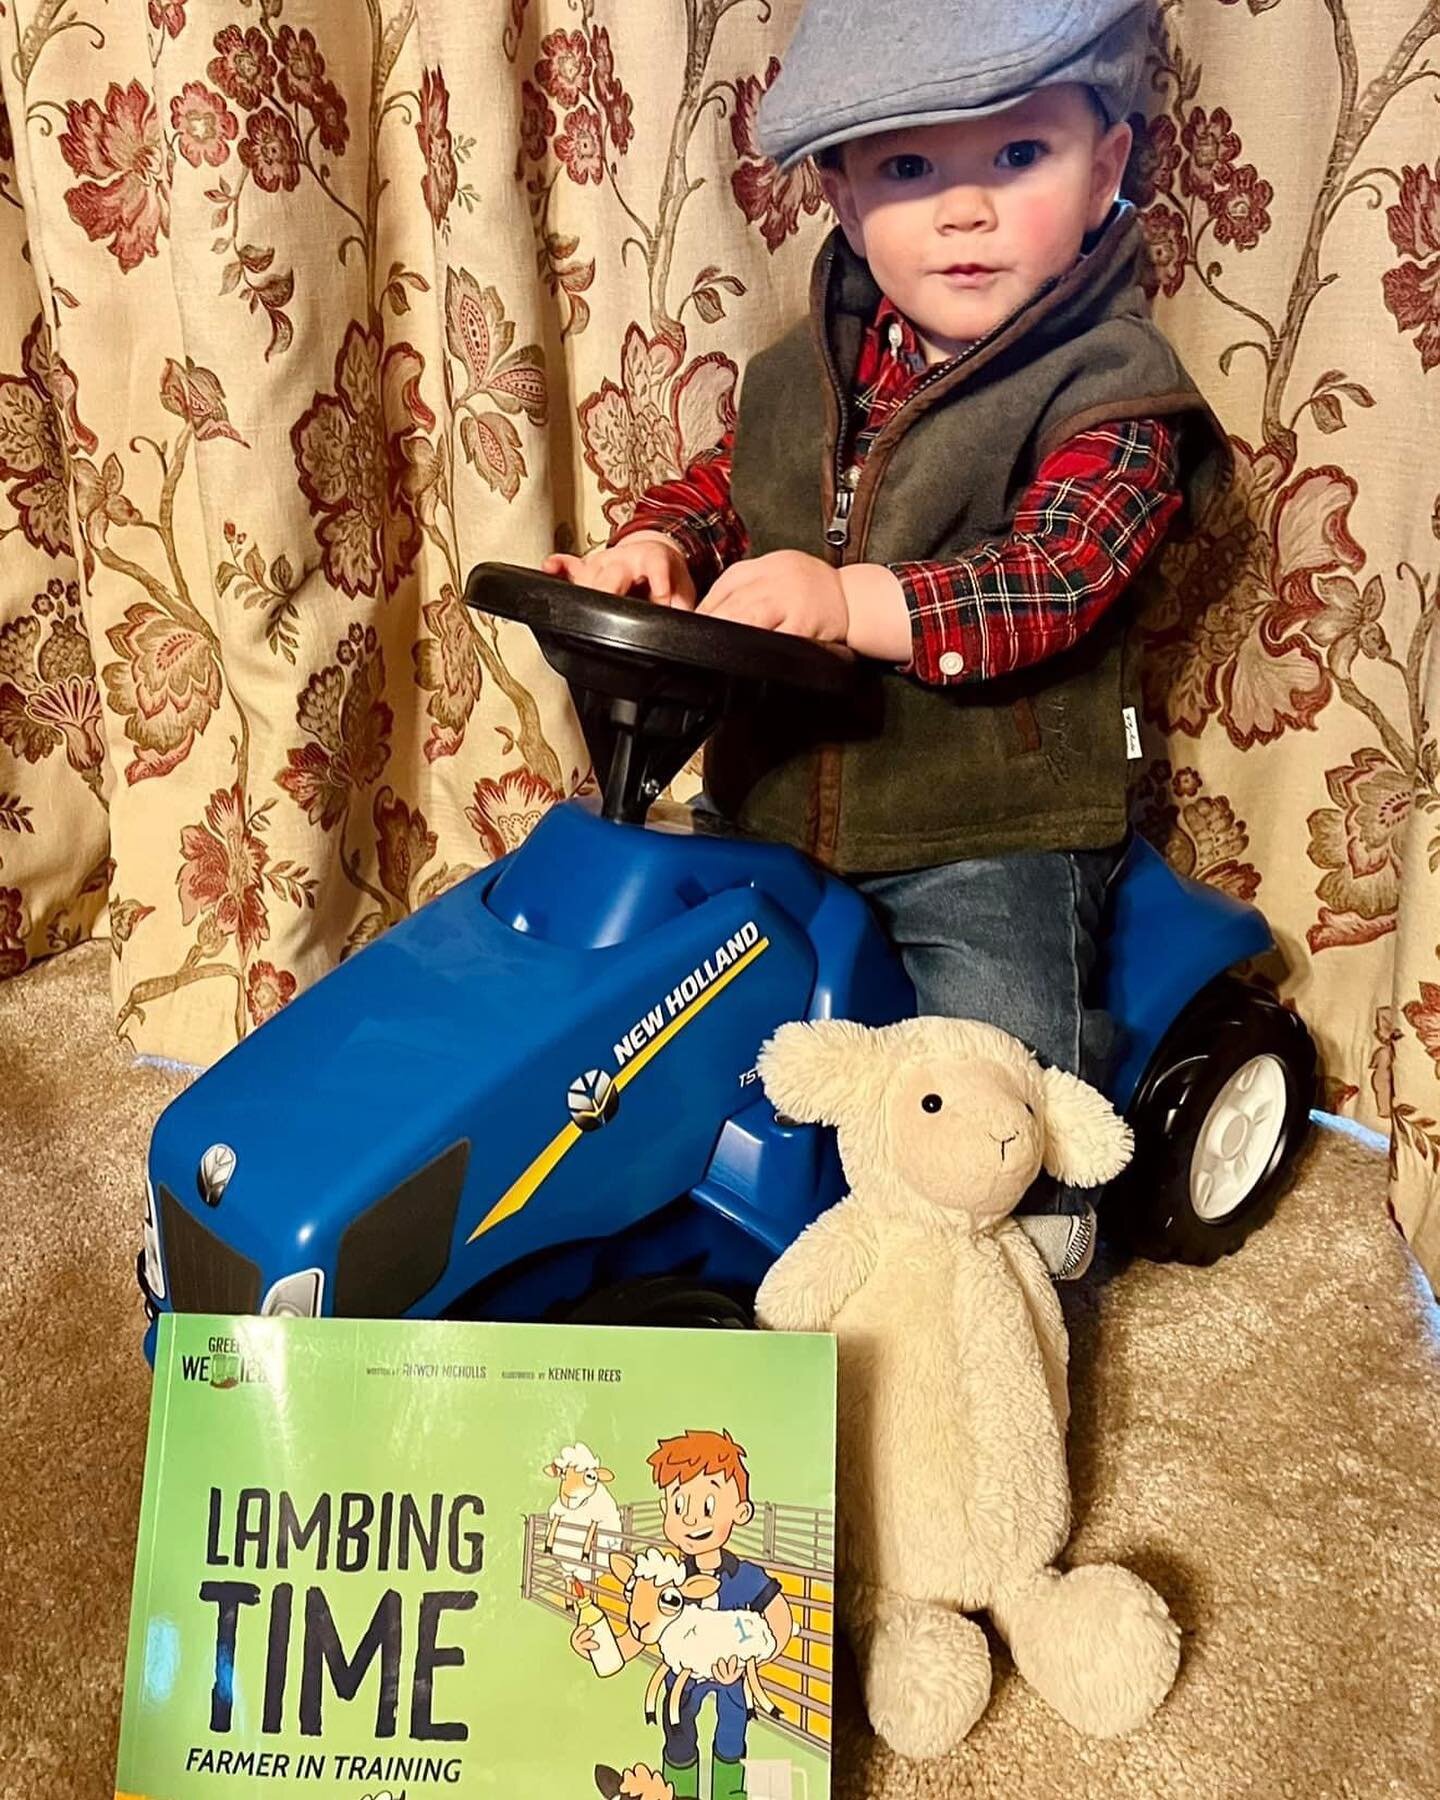 Happy World Book Day! Shout out to the Farmer in Training fans!